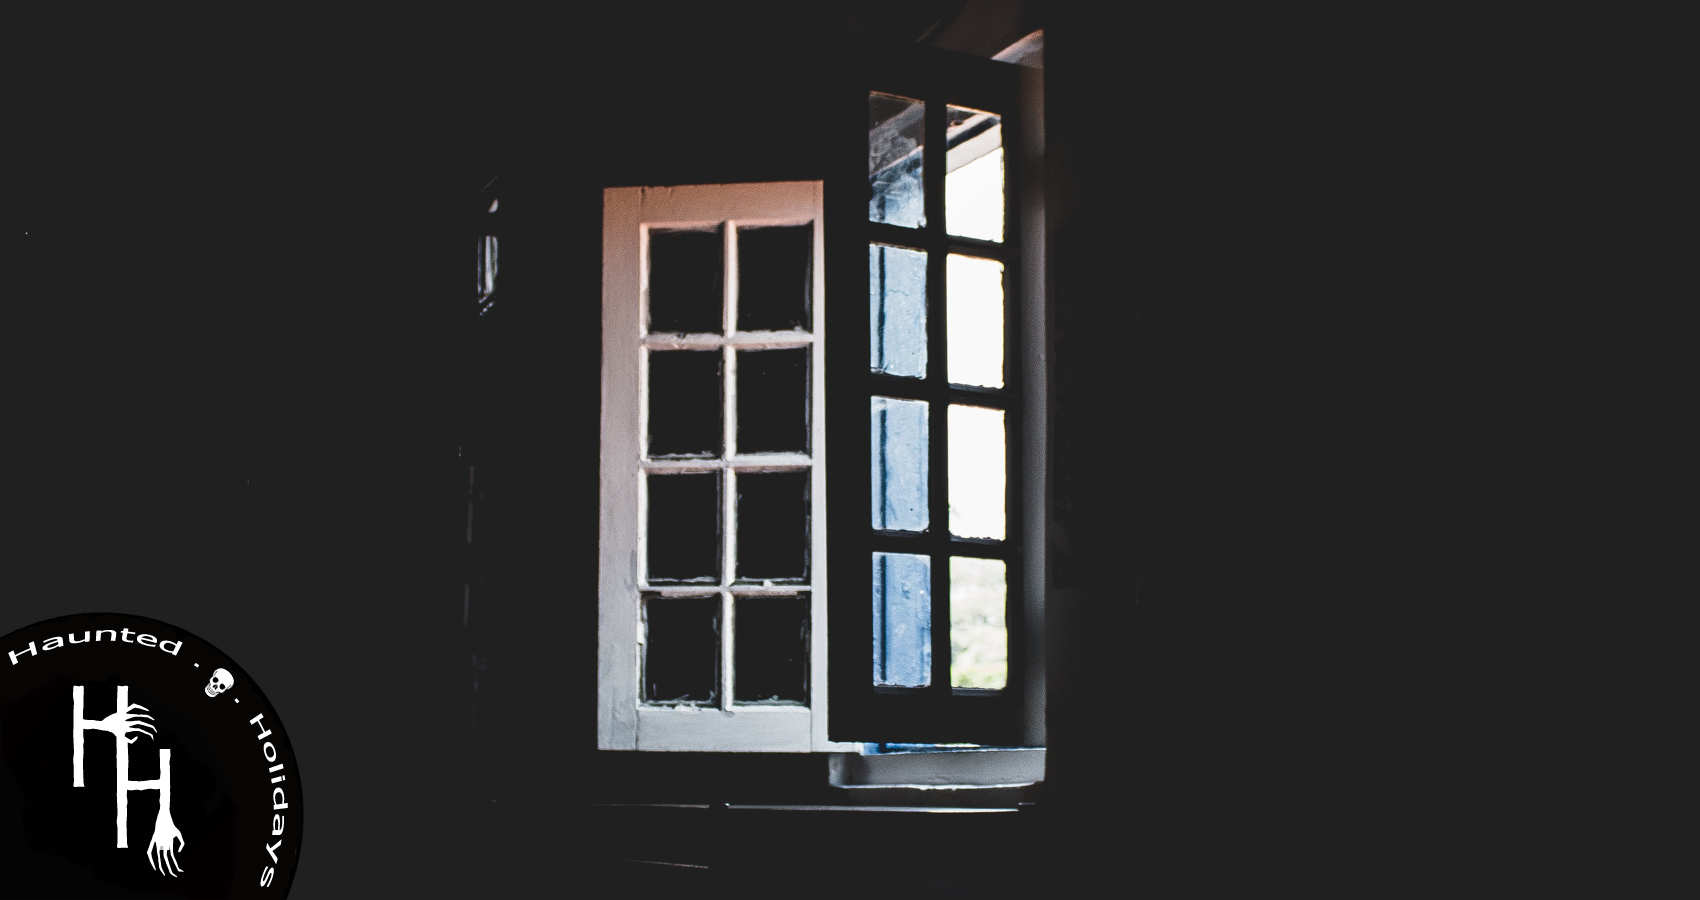 An Open Window Sounds The Same as Years Ago, poetry by Richard LeDue at Spillwords.com